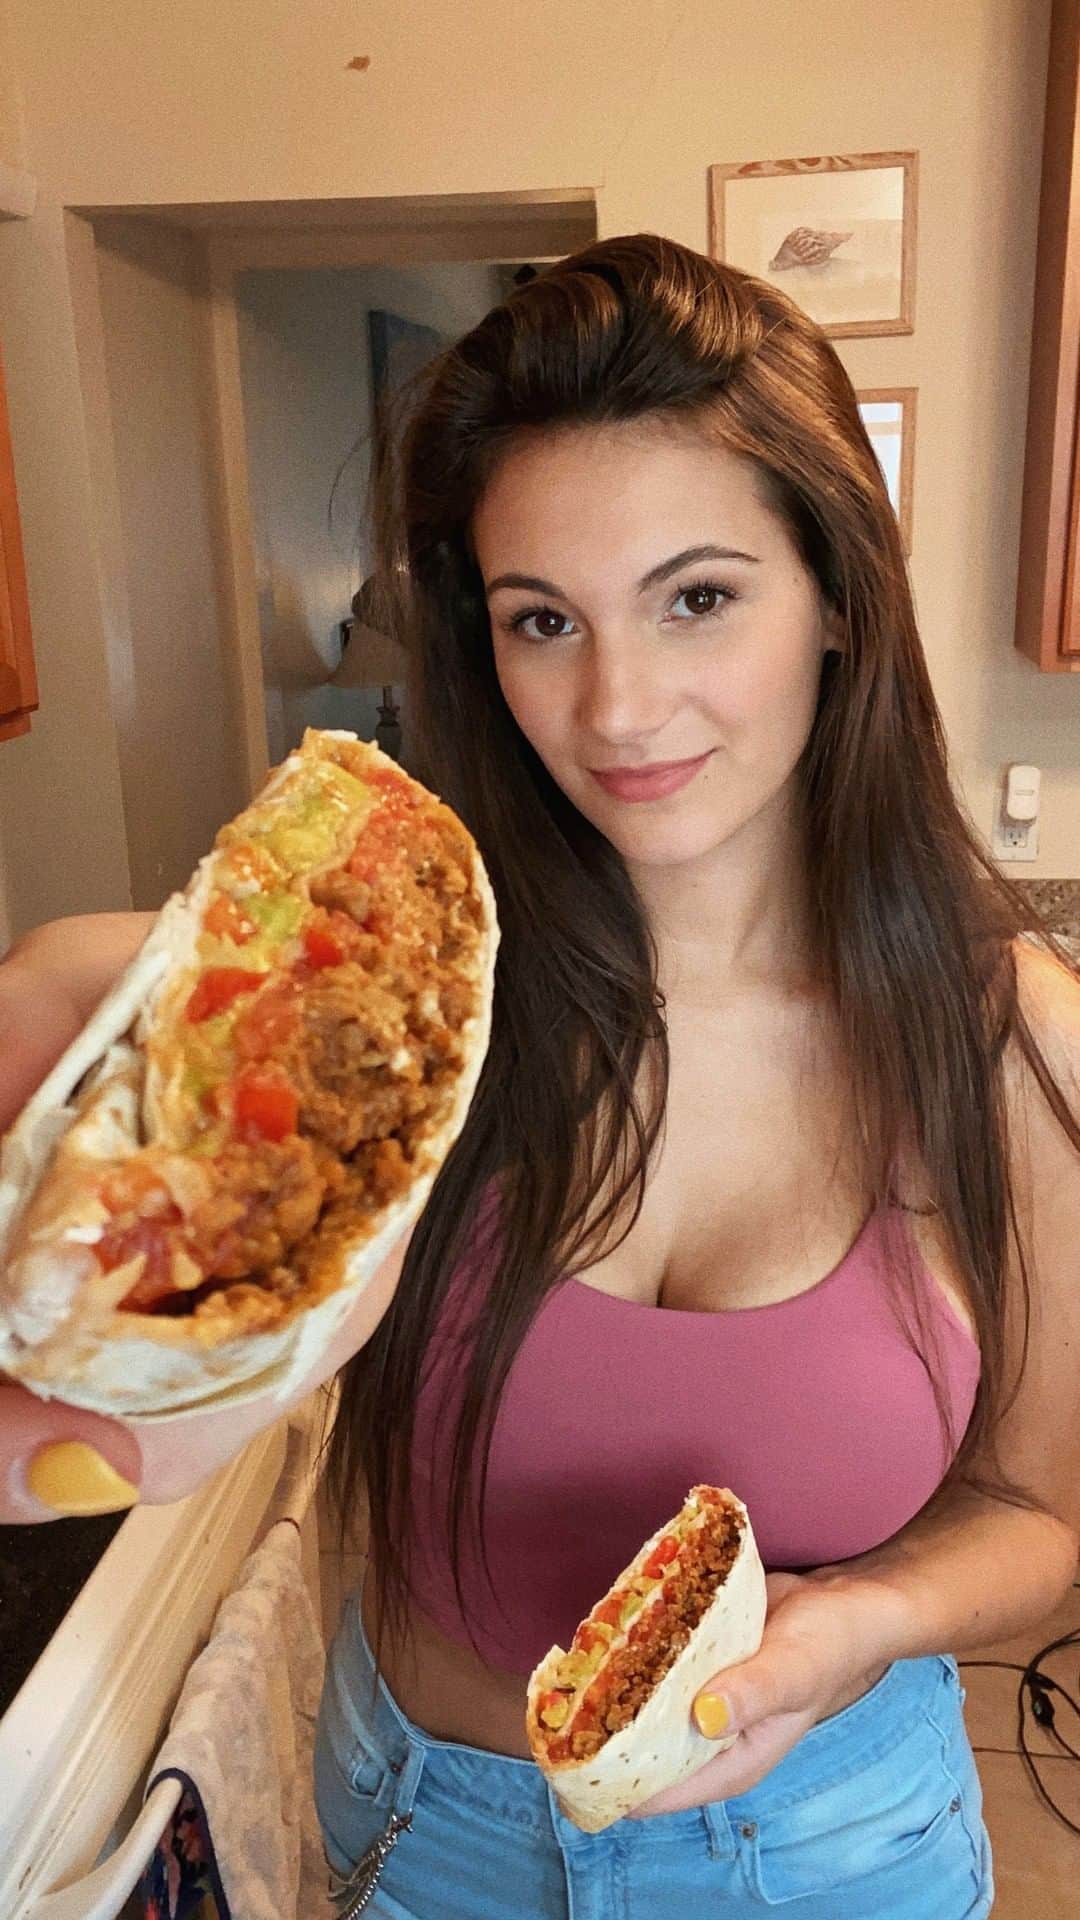 Alexia Rayeのインスタグラム：「first cooking video *~* I'm so excited to share more recipes I've been working on & hope you enjoy!!  Recipe: Taco Seasoning: 1 tbsp chili powder 1/4 tsp garlic powder 1/4 tsp onion powder 1/4 tsp red pepper flakes 1/4 tsp organo 1/2 tsp paprika 1 1/2 tsp cumin salt & pepper to taste  Crunchwrap: beef* 1 tomato 1/2 bell pepper 1/4 avocado sour cream* pepper jack cheese* 2 tortillas (add anything else you love in a taco! I would add jalapeños, lettuce, onions, and salsa but i’m out 🥴)  Instructions 1.Heat the beef in a pan over medium heat for a few minutes with 1 tbsp of the taco seasoning (don't use the entire batch unless you're cooking a lot) and a dash of water to minimize oil use.  2. Layer fillings on center of tortilla.  3. Fold tortilla inwards as shown in video. 4. Air fry for 6 min at 370F or bake in oven for 5-8 min at 325F.  * indicates mock meat/dairy as I can't eat these - but use what you want :)」